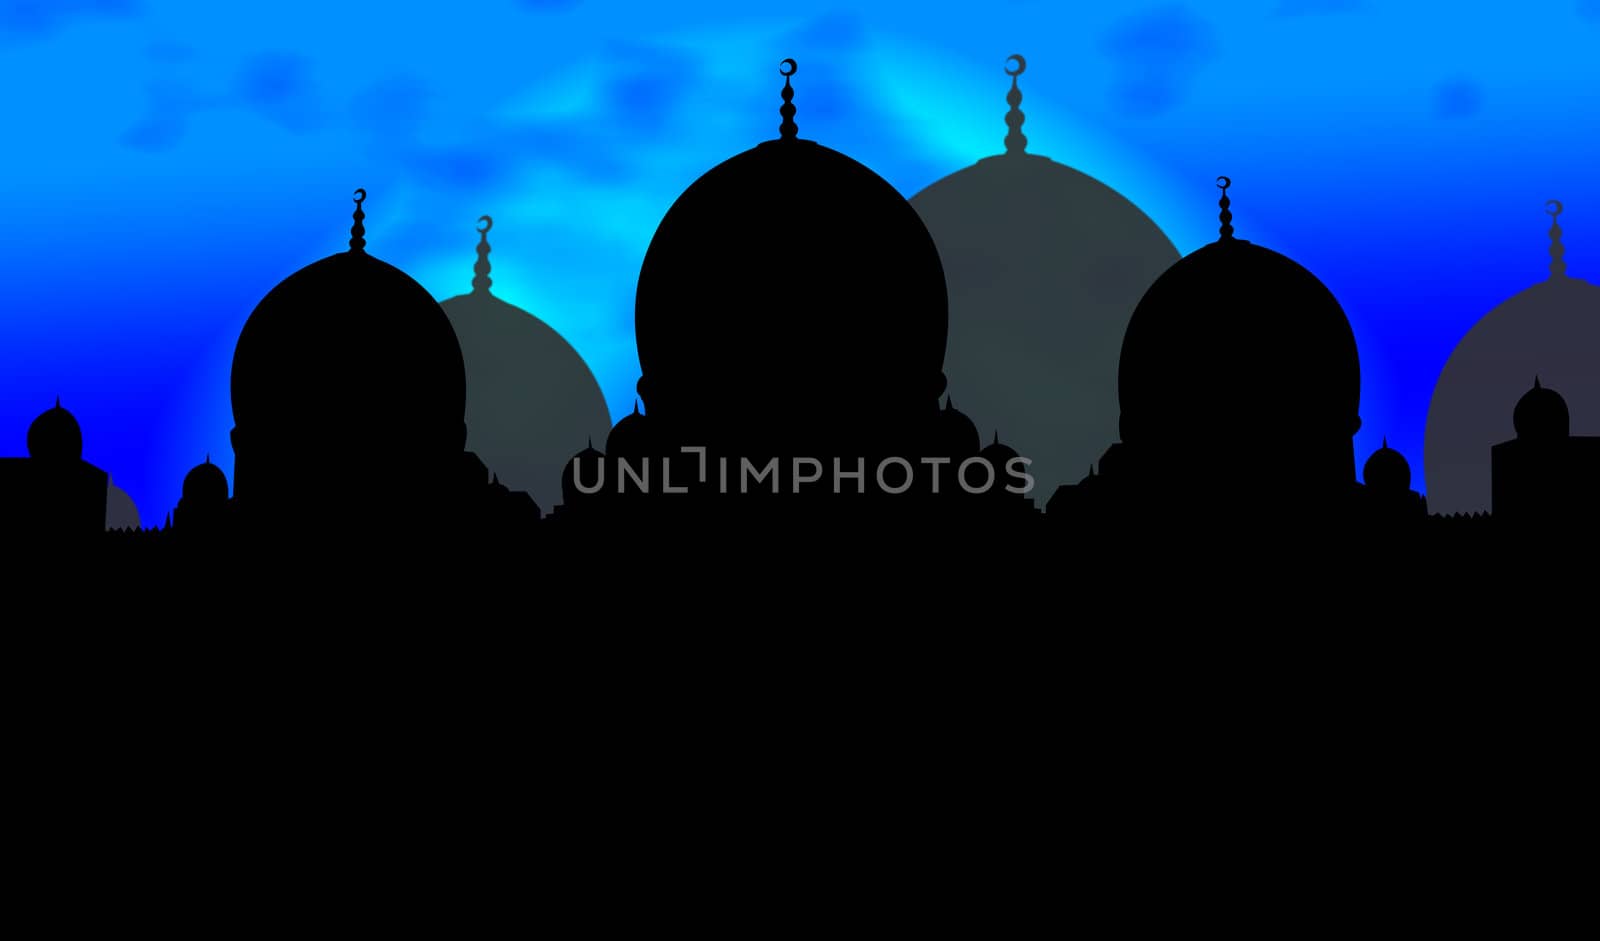 Night Mosque Silhouette Illustration With Glowing Sky Background